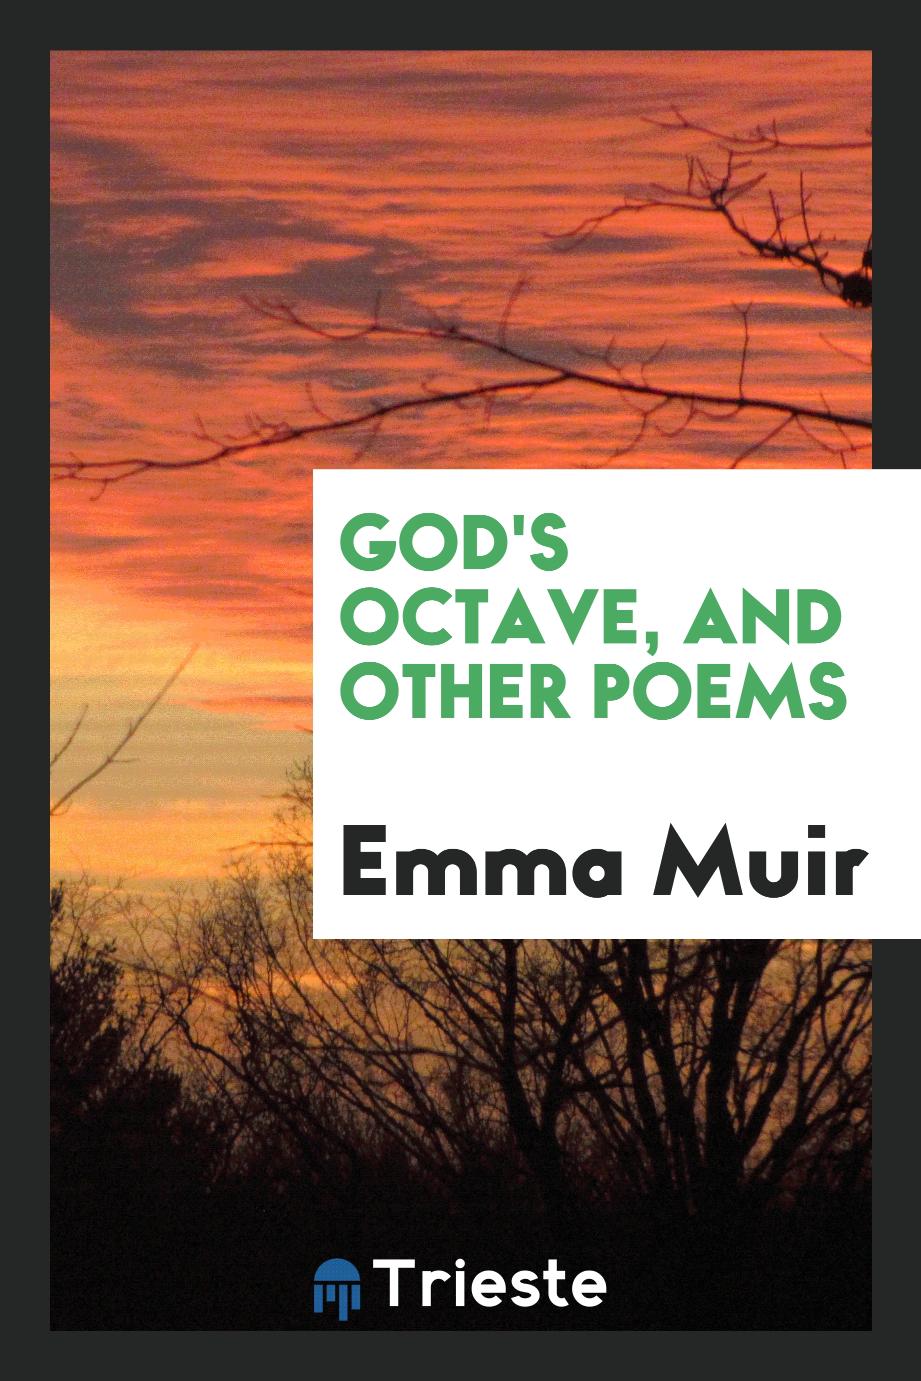 God's octave, and other poems